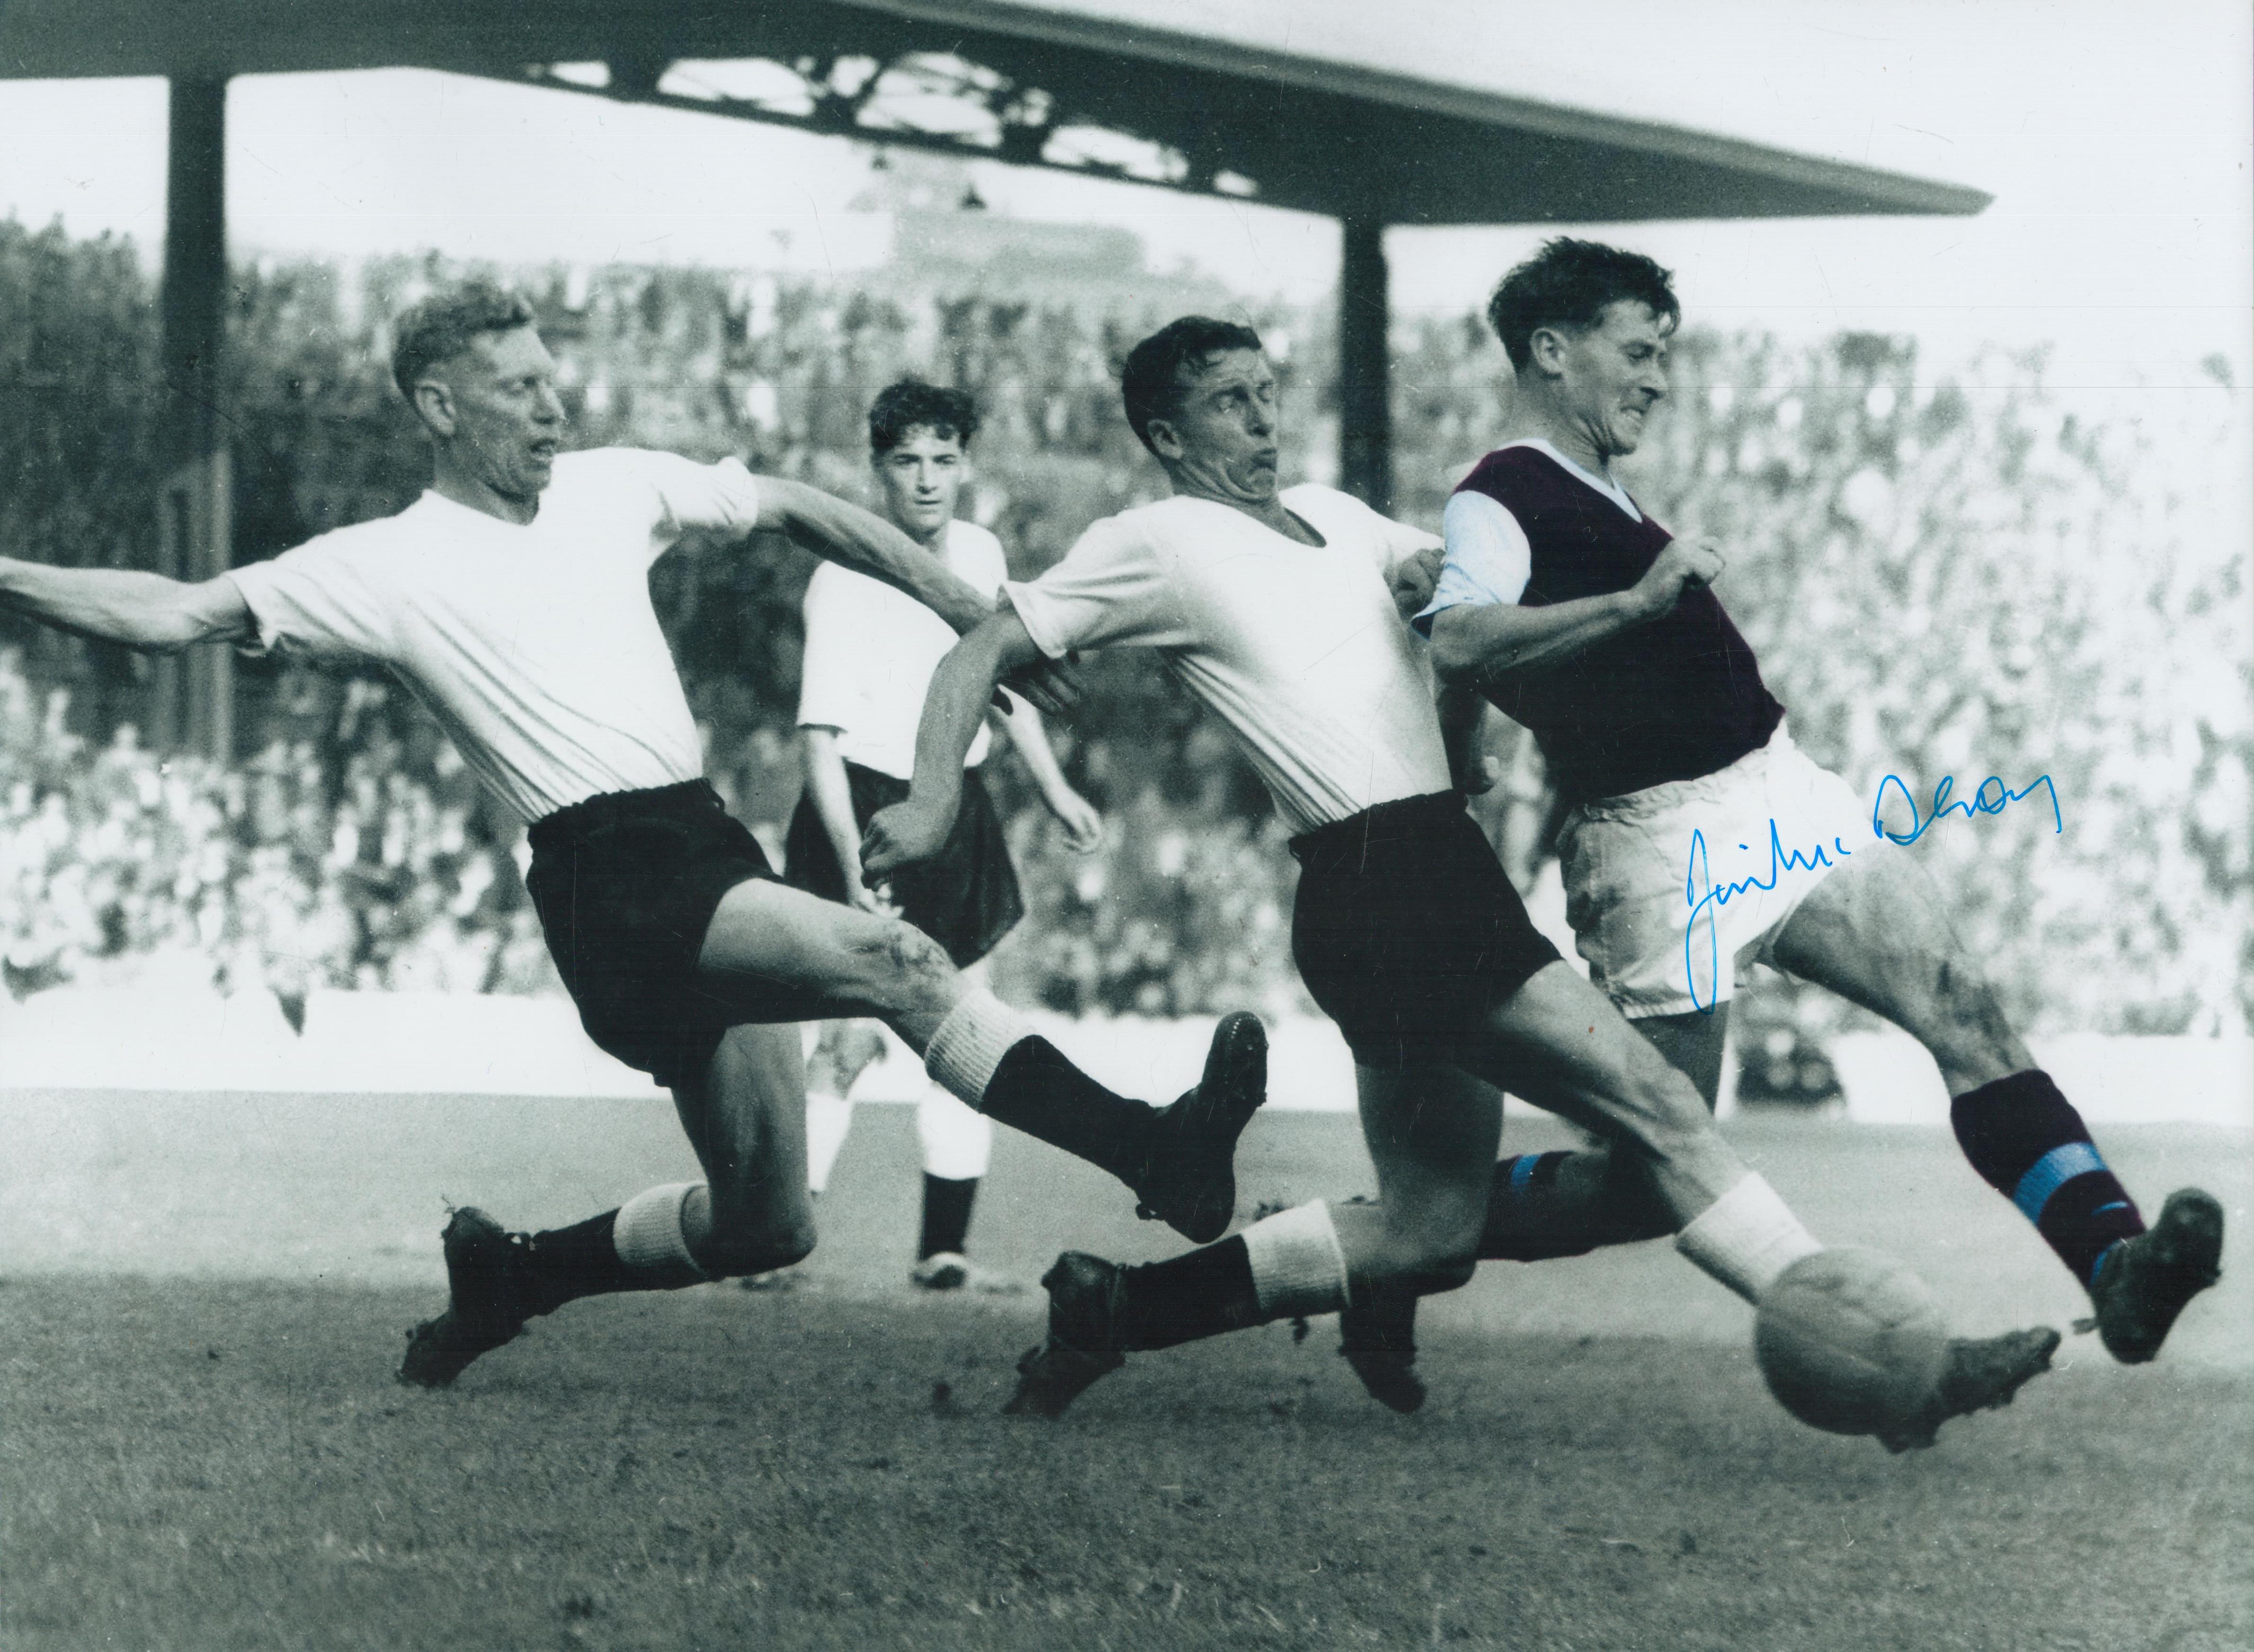 Autographed JIMMY McIlroy 16 x 12 Photo : Colorized, depicting Burnley midfielder JIMMY McIlroy gets